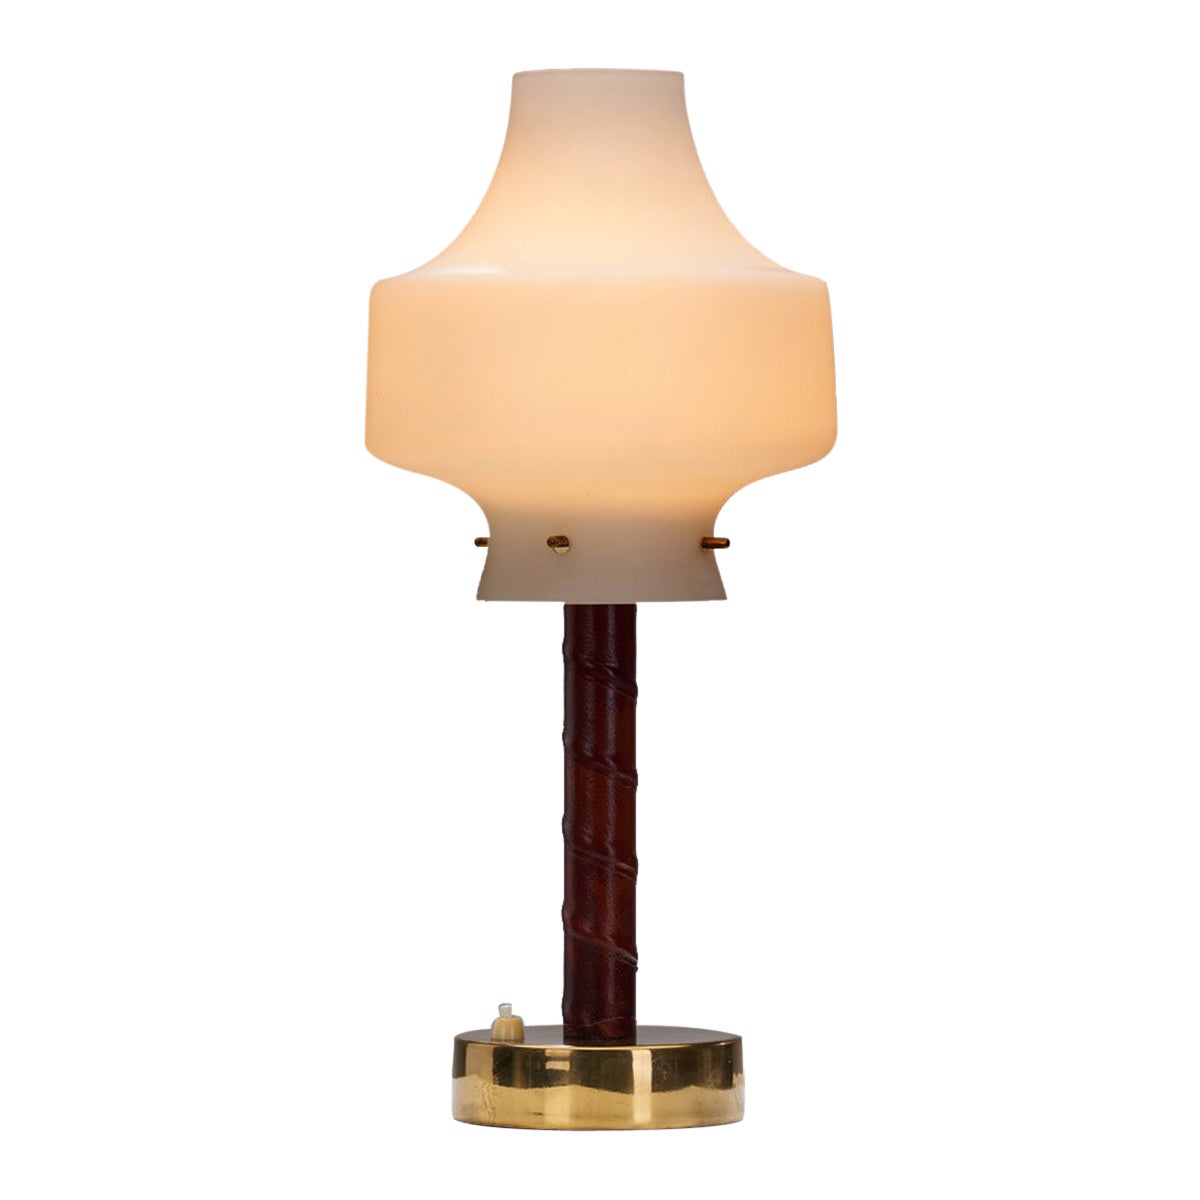 Model "E 1339" Table Lamp from Asea, Sweden ca 1950s For Sale at 1stDibs